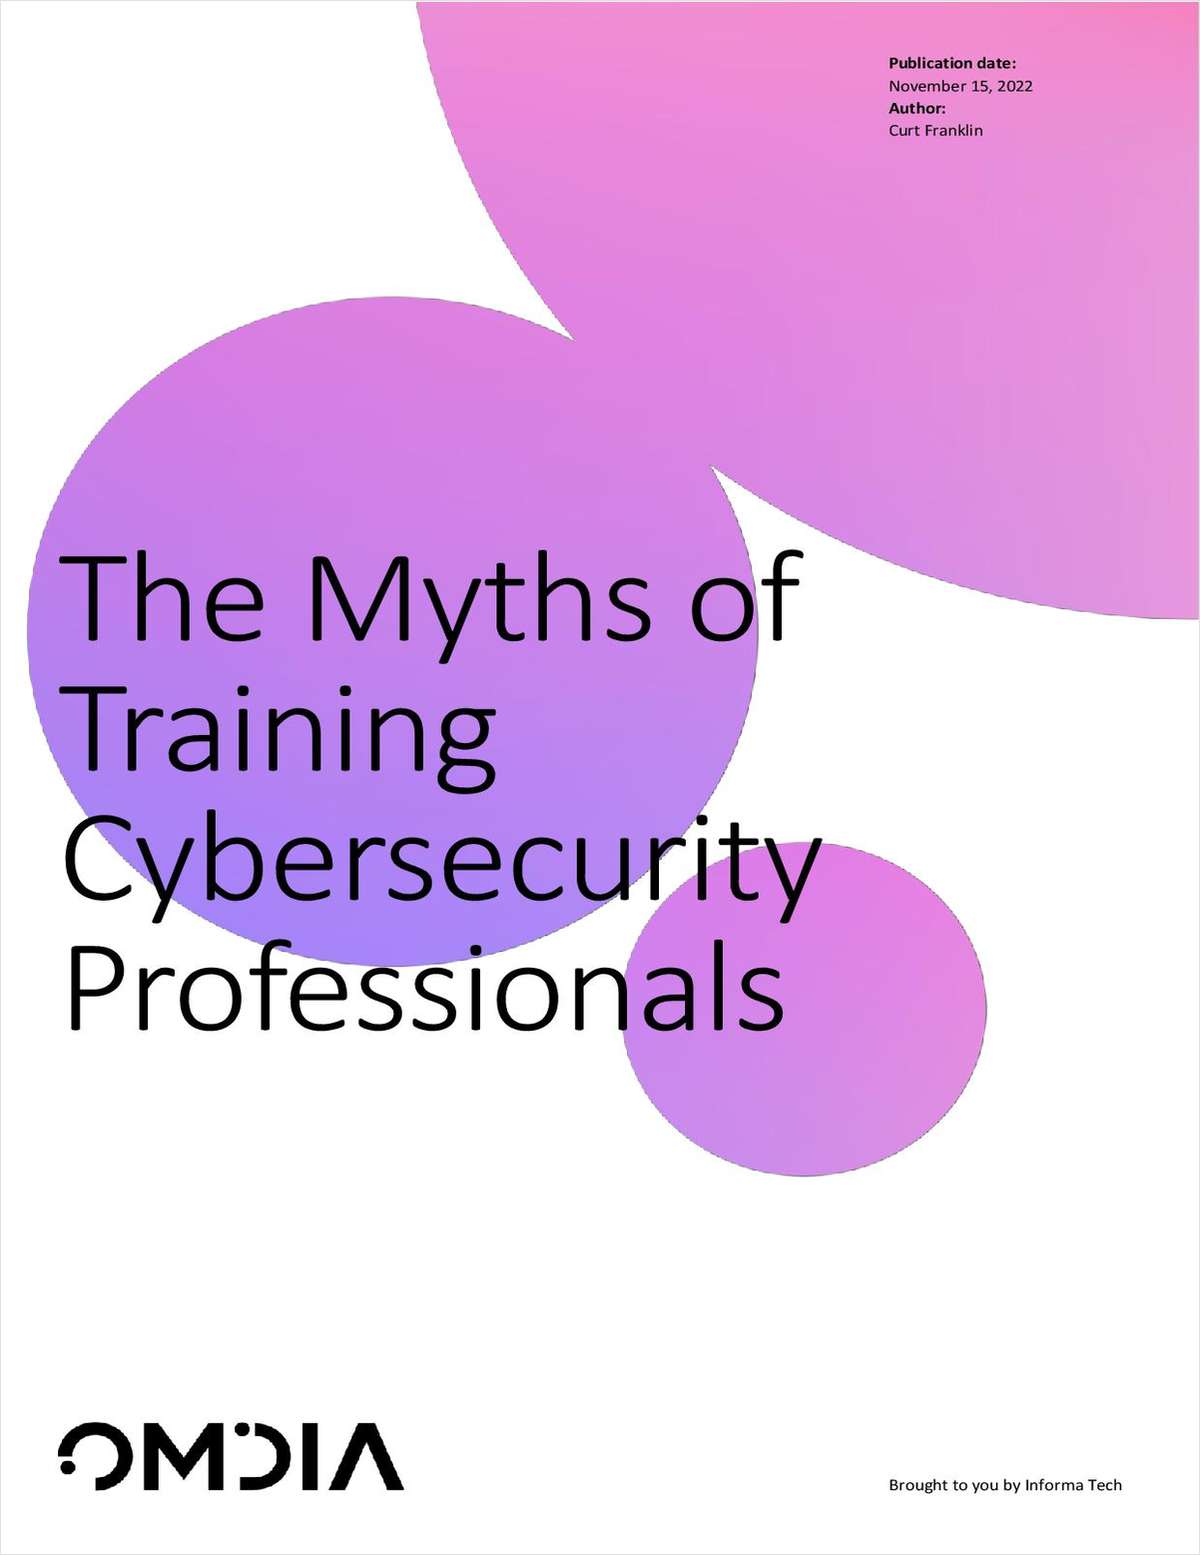 The Myths of Training Cybersecurity Professionals